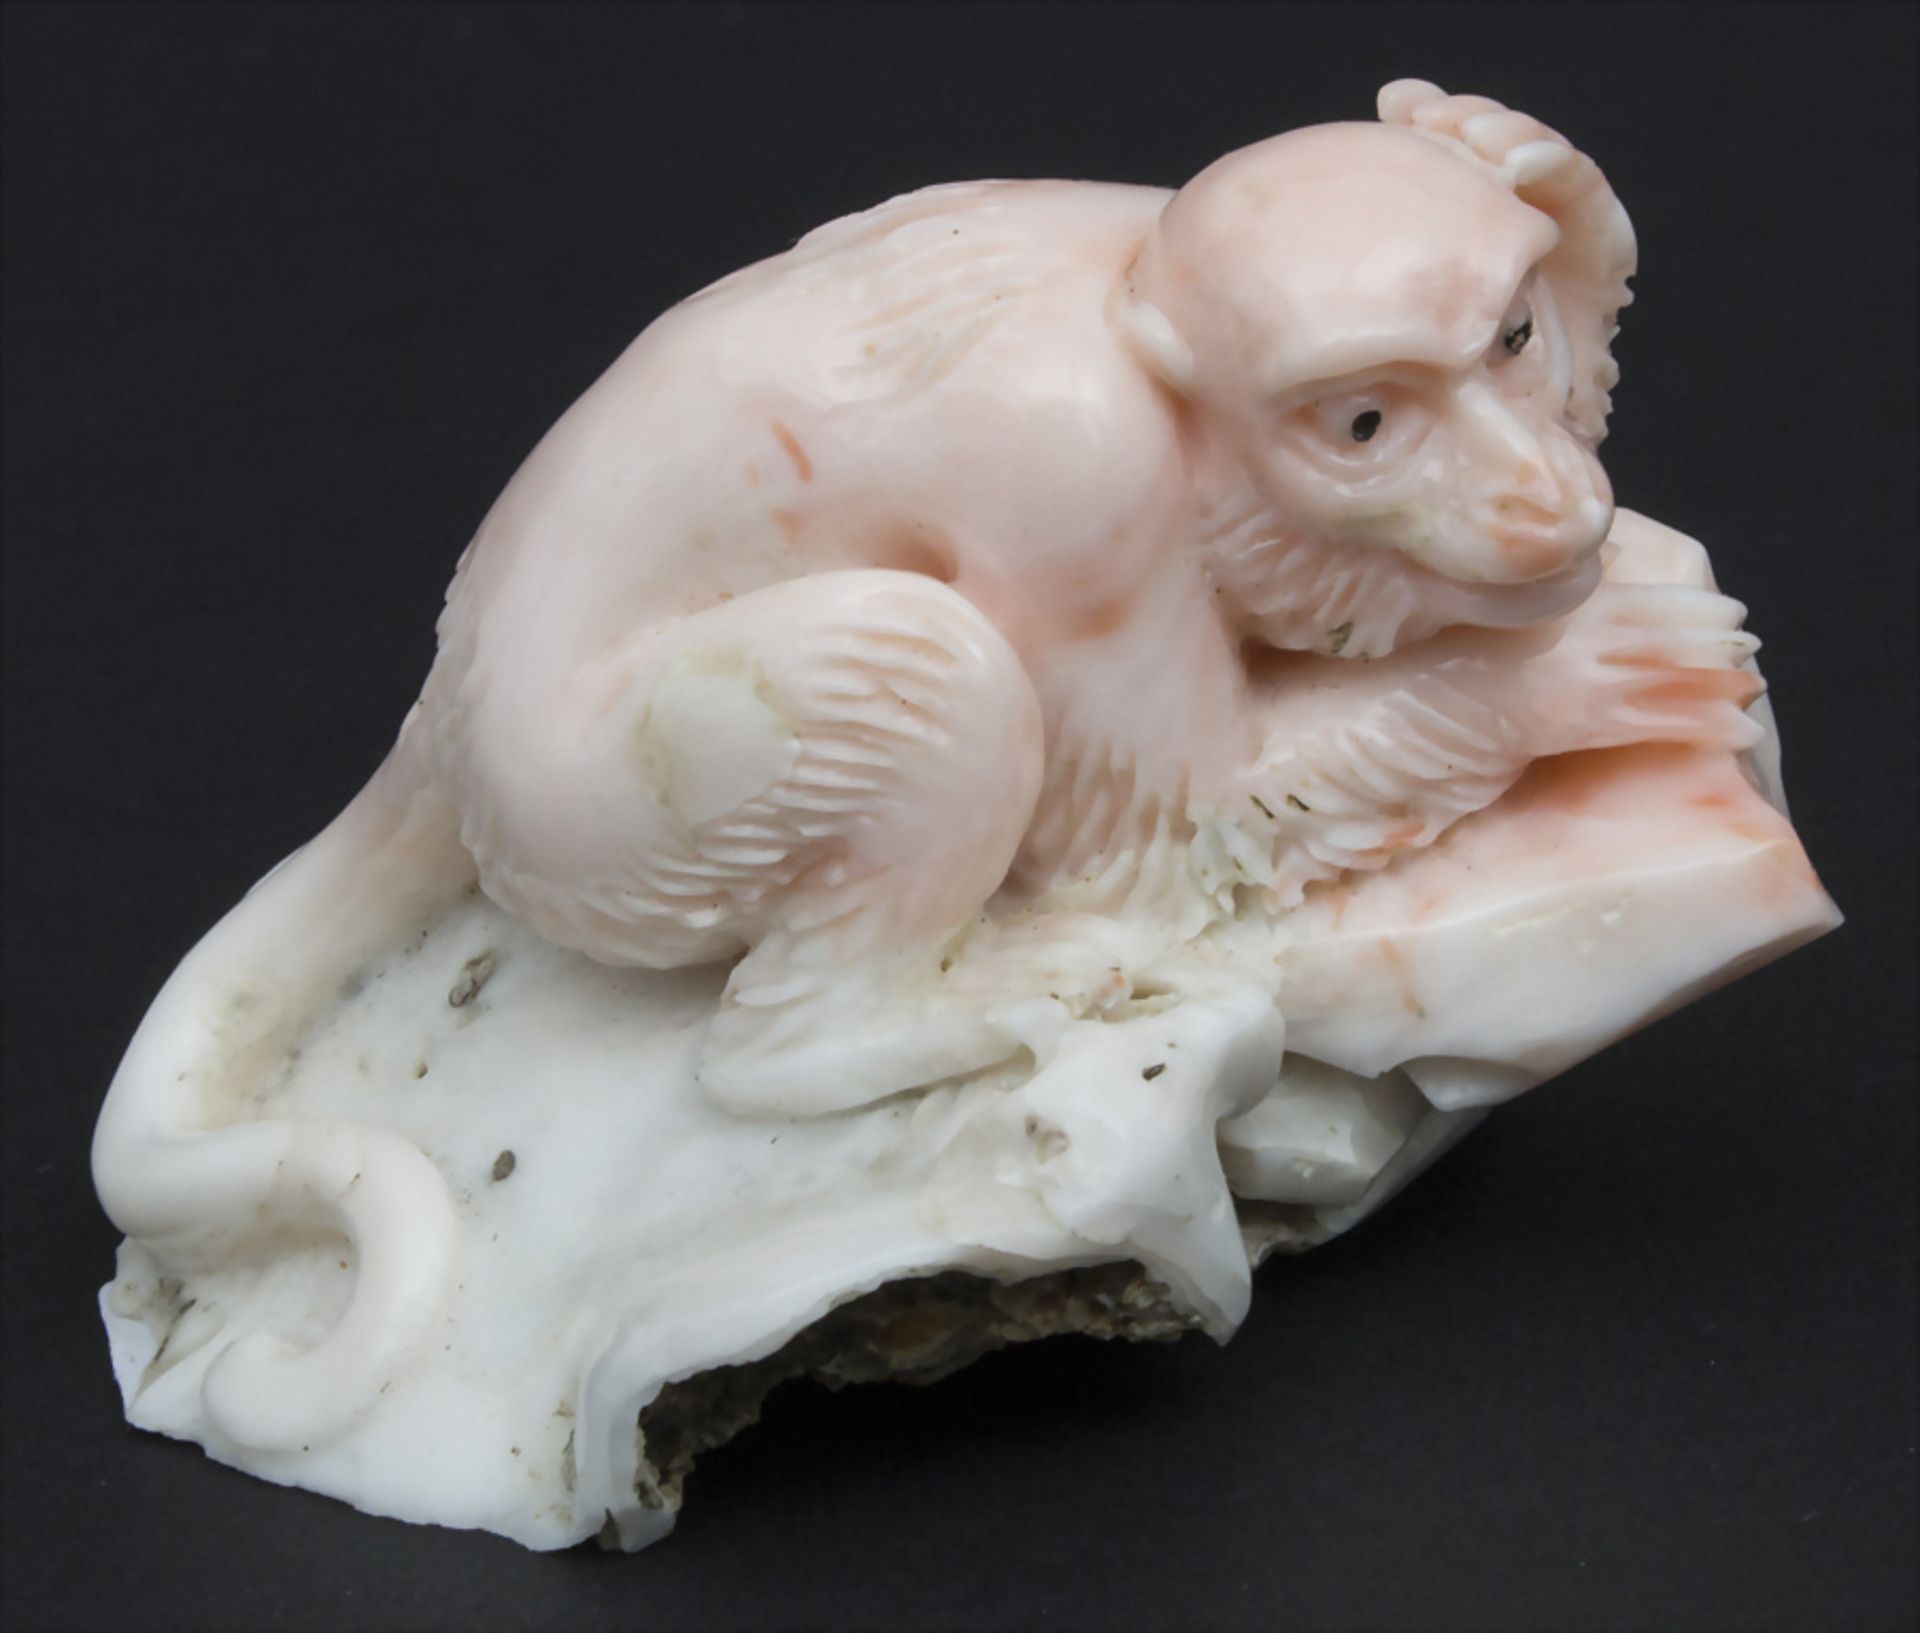 Korallenschnitzerei 'Affe' / A coral carving 'Monkey', China, 18. Jh.